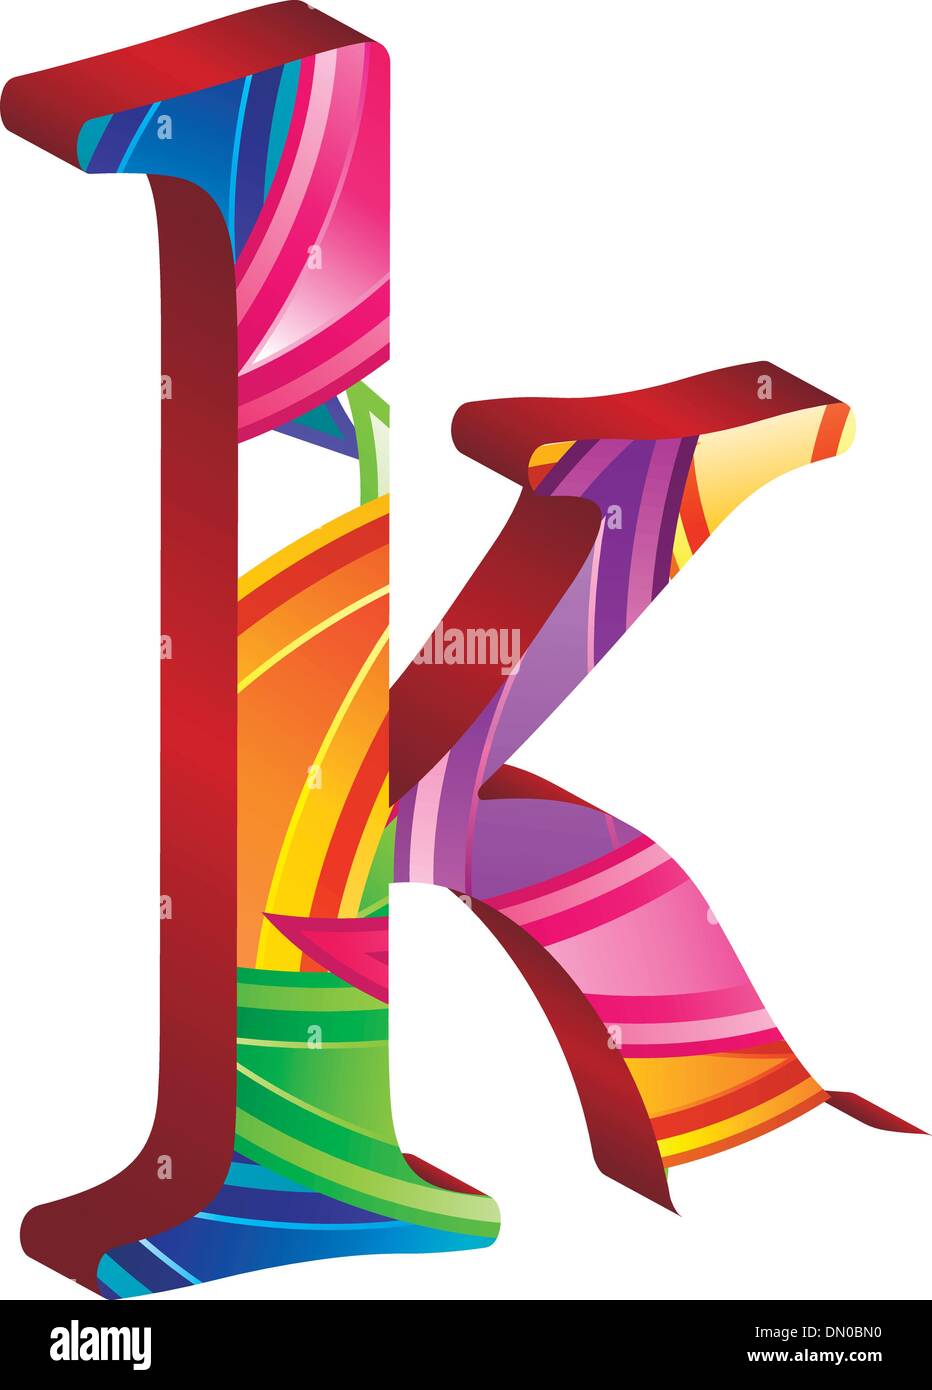 Colored alphabet with spikes and leaves Stock Vector